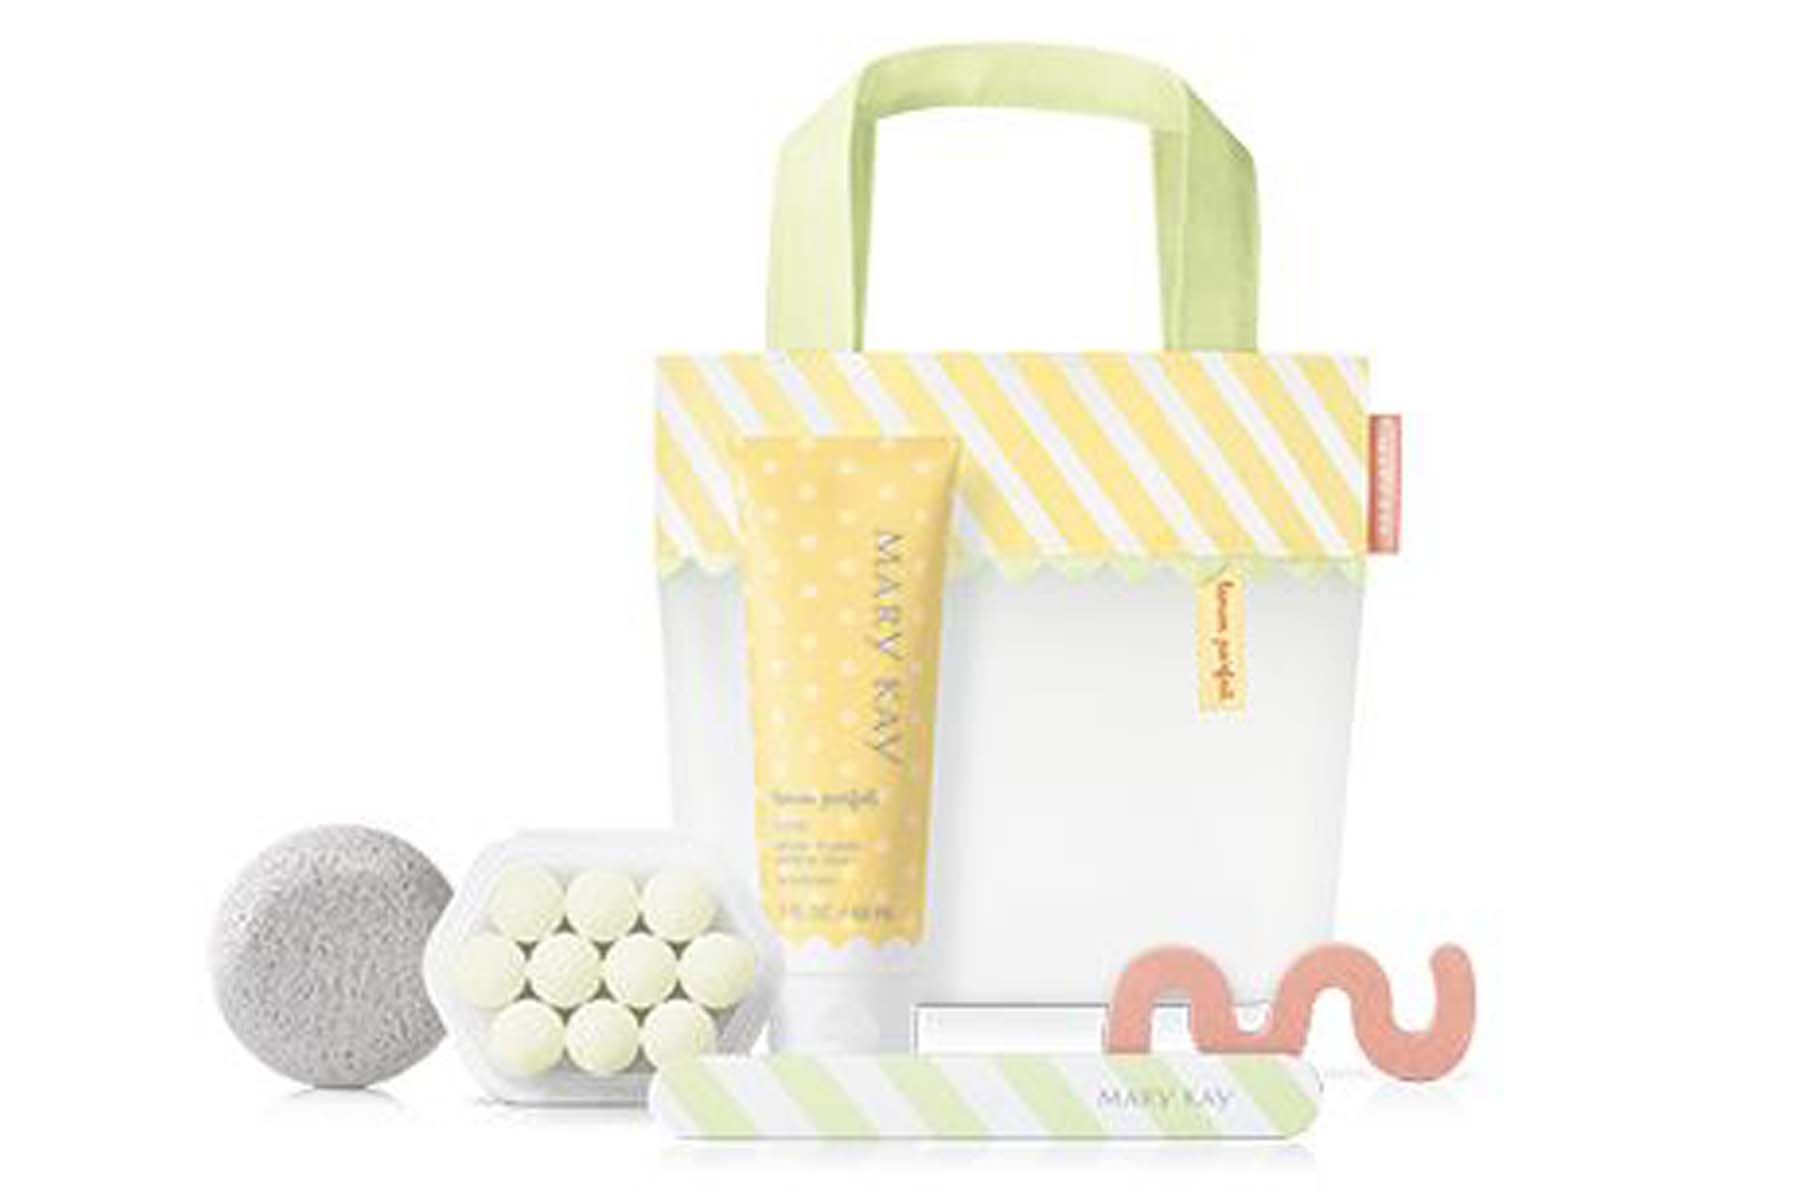 Mary Kay's Limited Edition Lemon Parfait Pedicure Collection (Photo: Mary Kay)